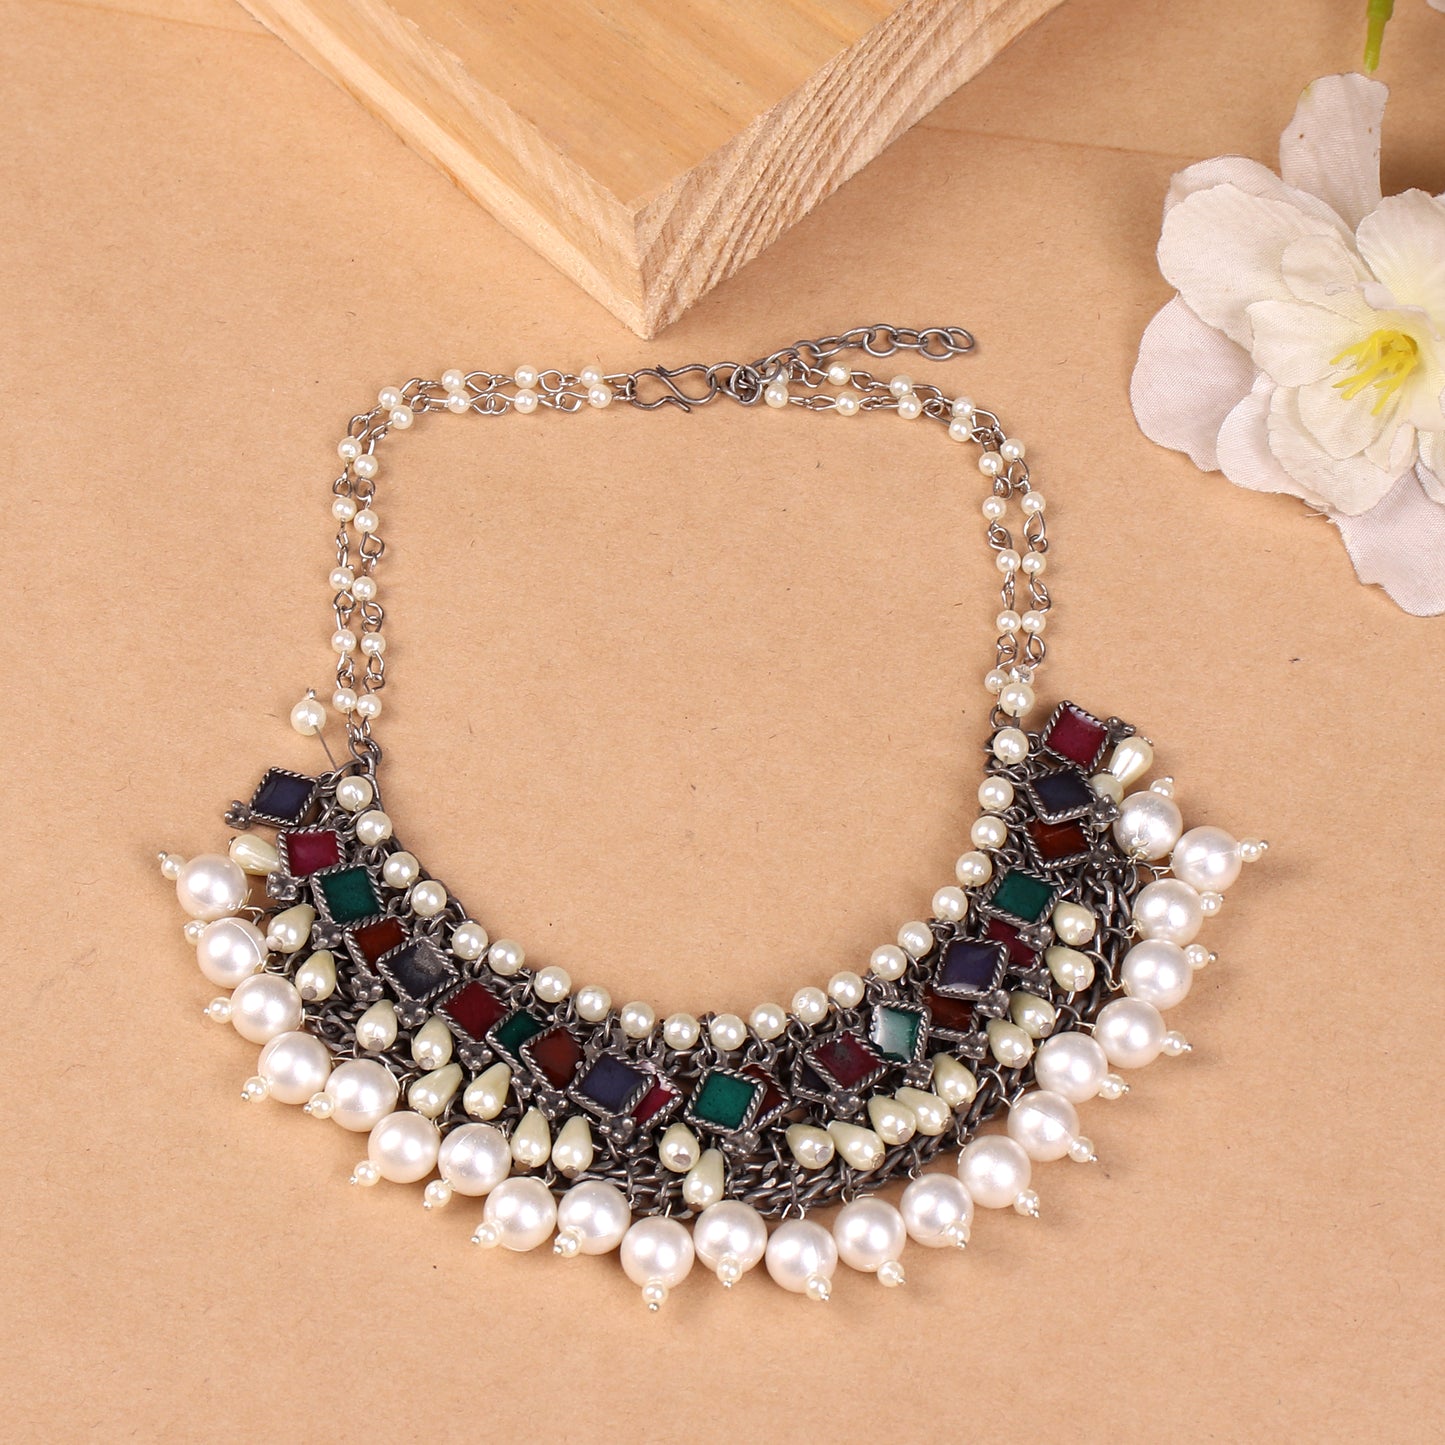 The Caledonia Pearly Necklace